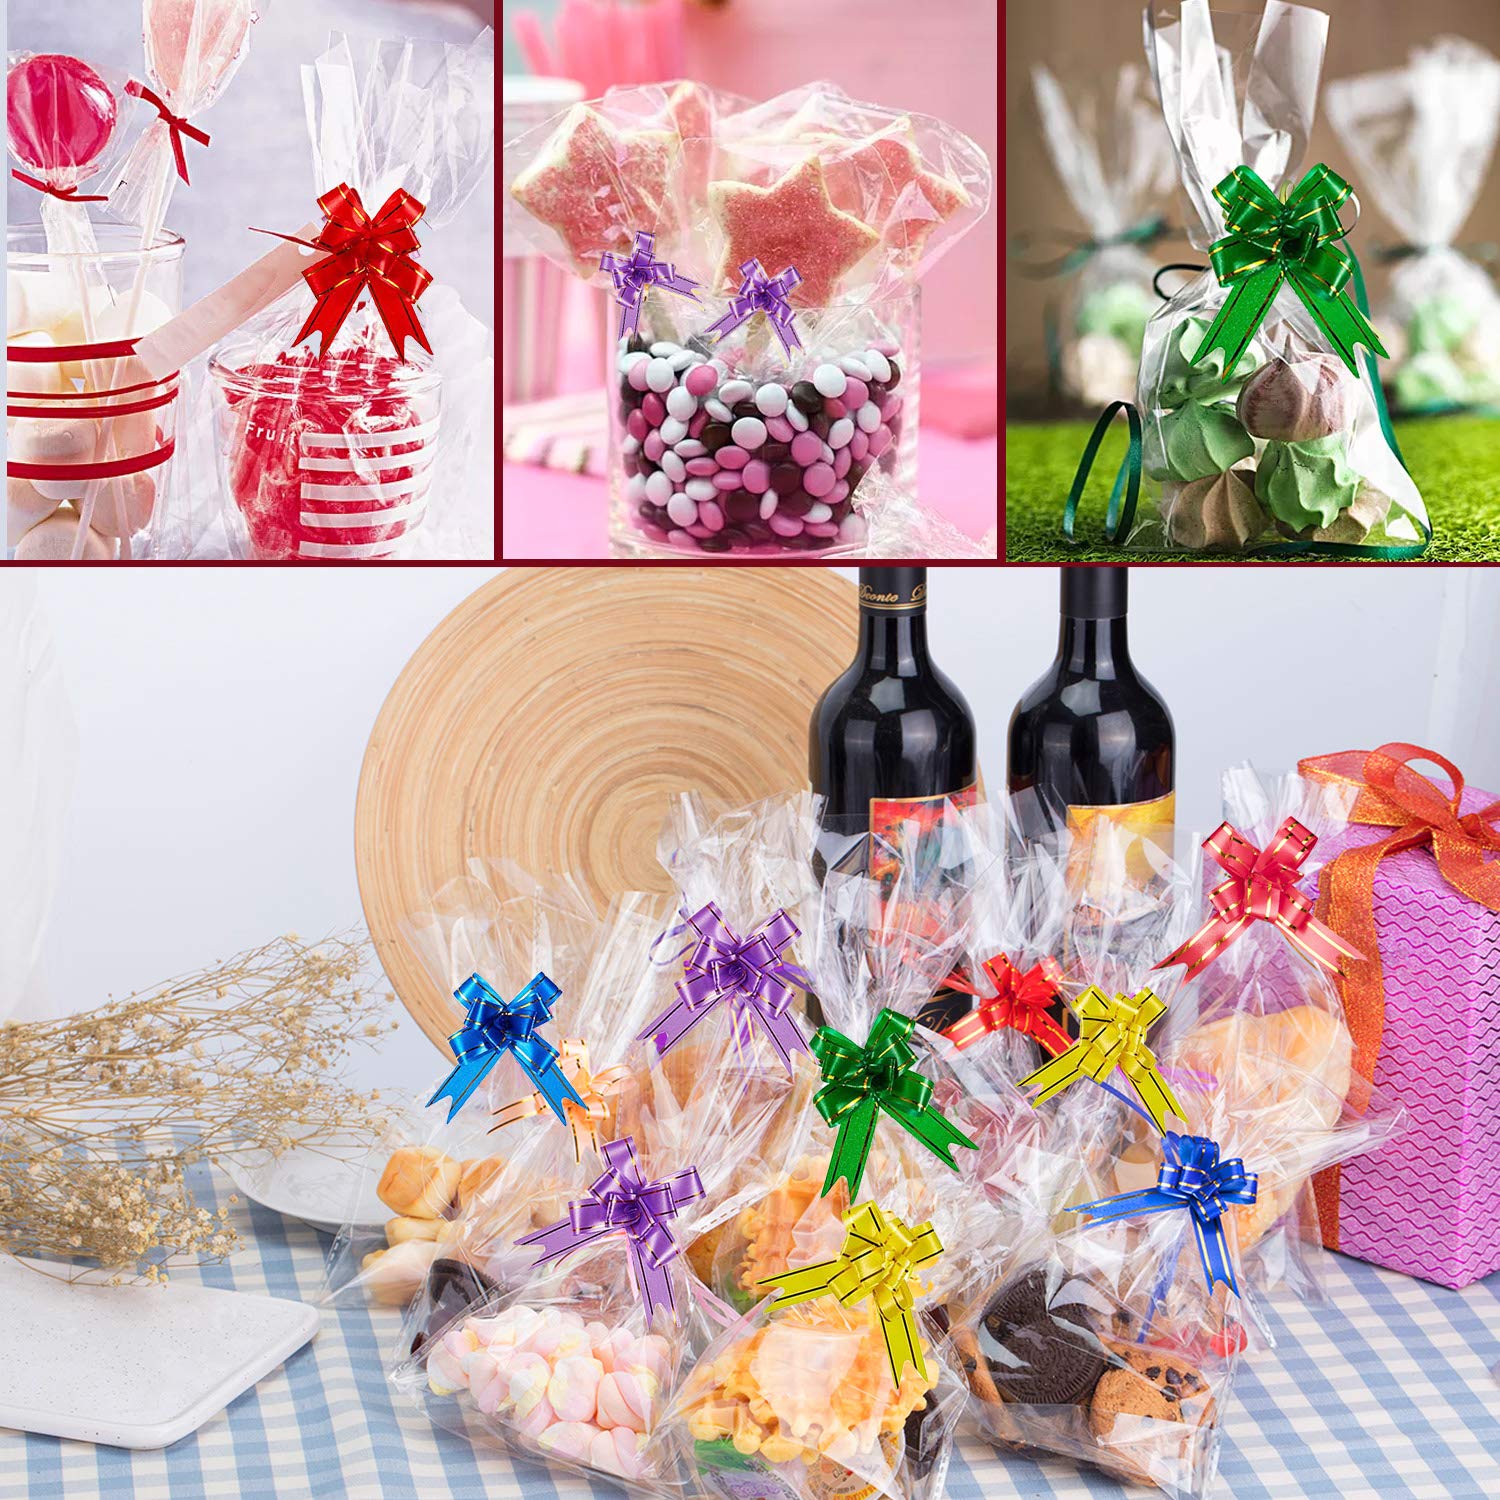 50PCS Clear Cellophane Treat Bags, AUERVO 13 x 18 cm Clear Resealable Flat Cello Bags Sweet Party Gift Bags Candy/Cookie/Gift/with 50PCS Colorful Pull Bows… (13x18 cm Cellophane Treat Bags)